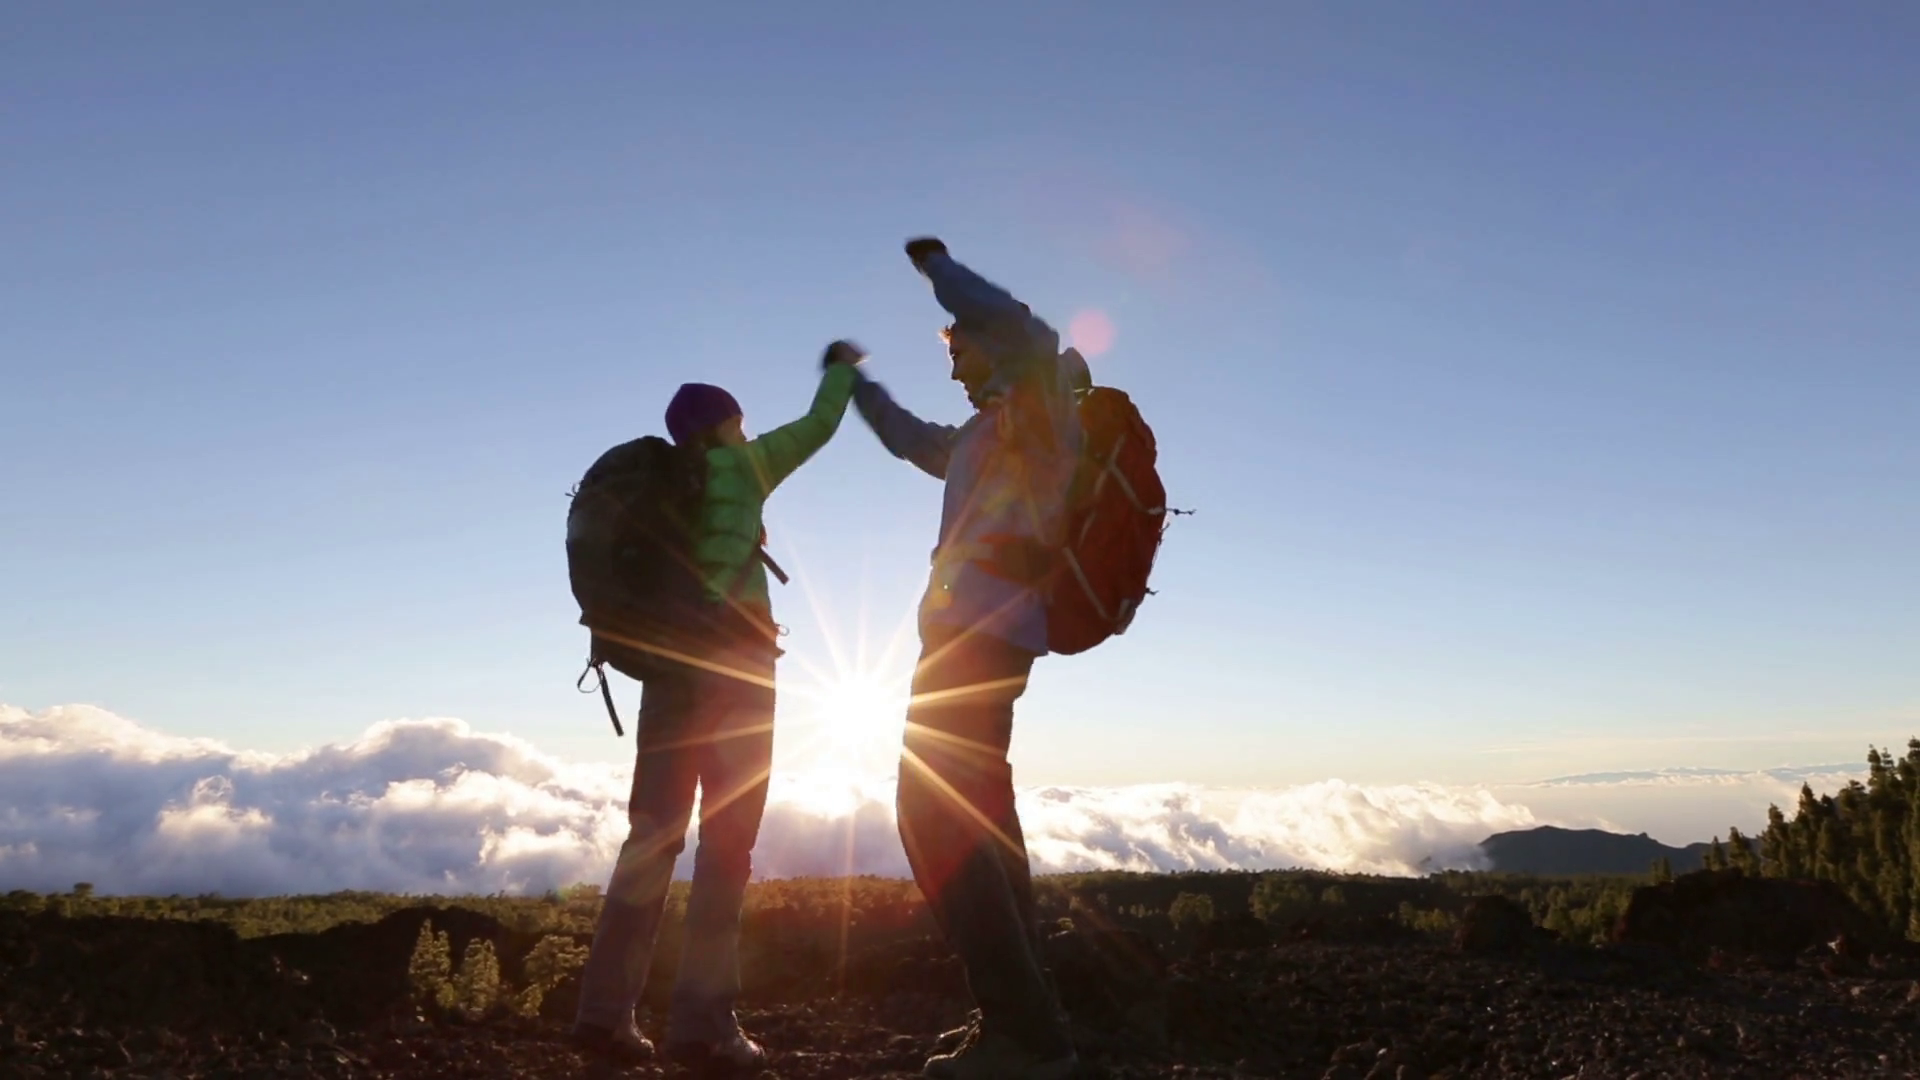 videoblocks hikers reaching summit cheering happy at sunset hiking couple walking in mountain reaching top robhkzsjz thumbnail full07 | Stay at Home Mum.com.au